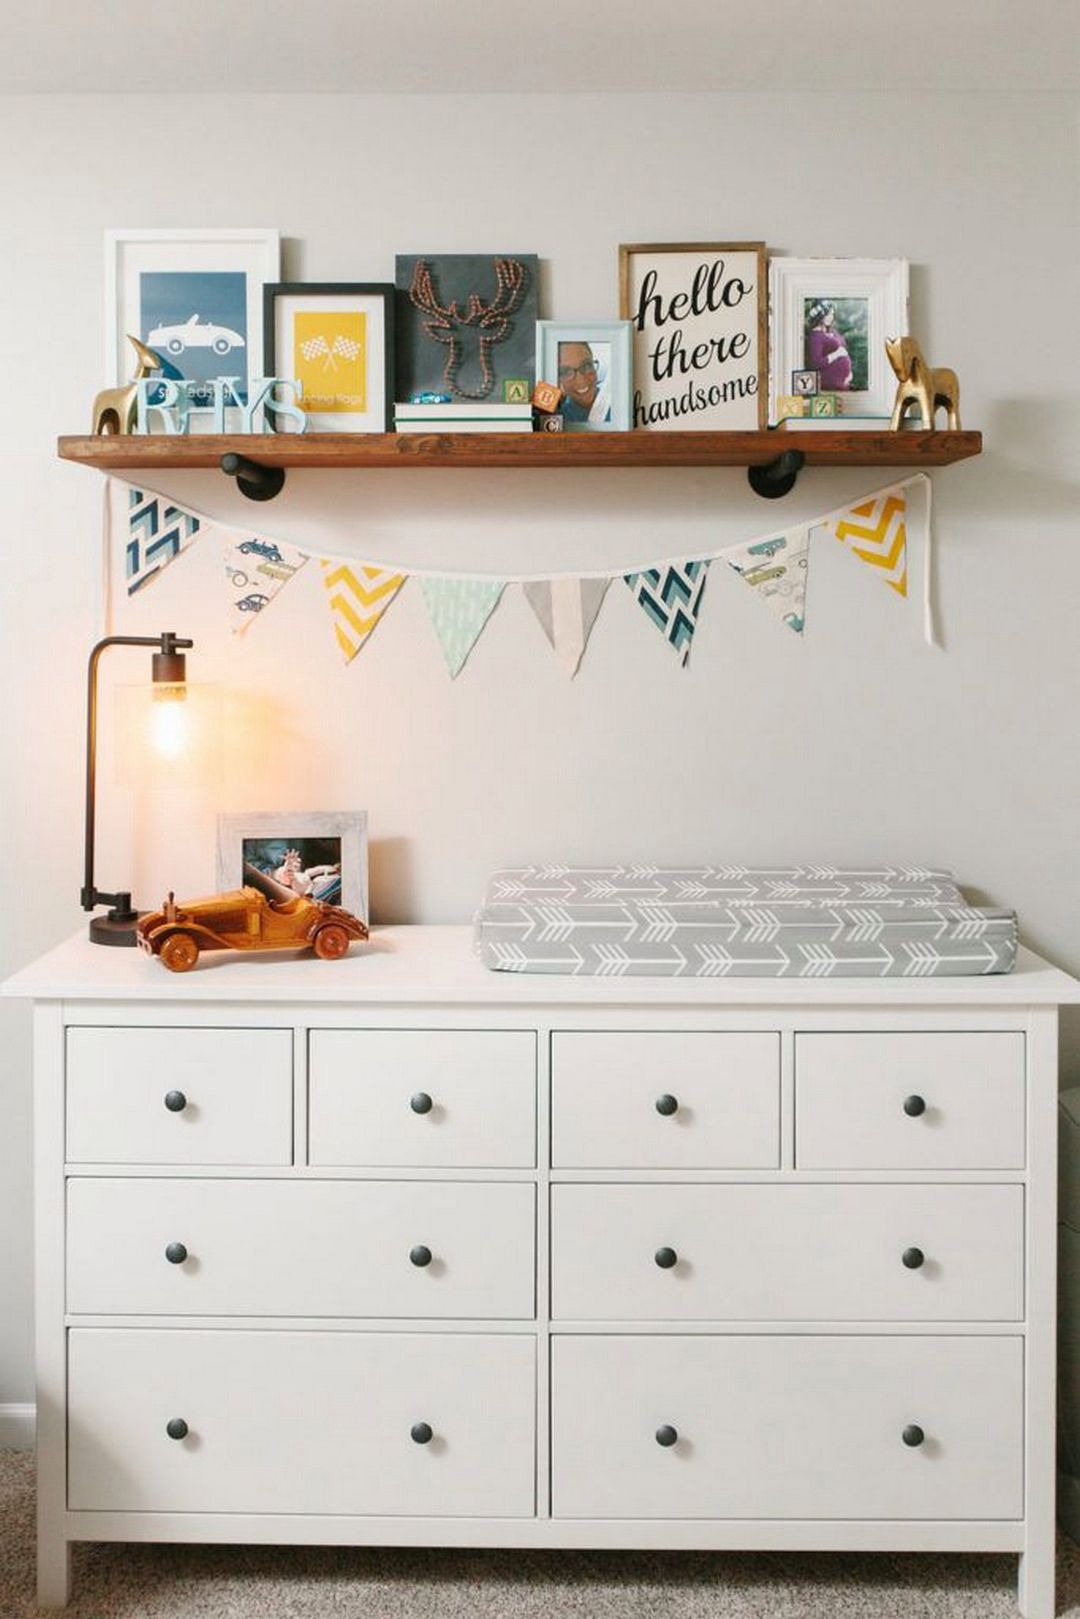 10 Ways You Can Reinvent Nursery Decor Without Looking Like An Amateur -   10 room decor Photos layout ideas